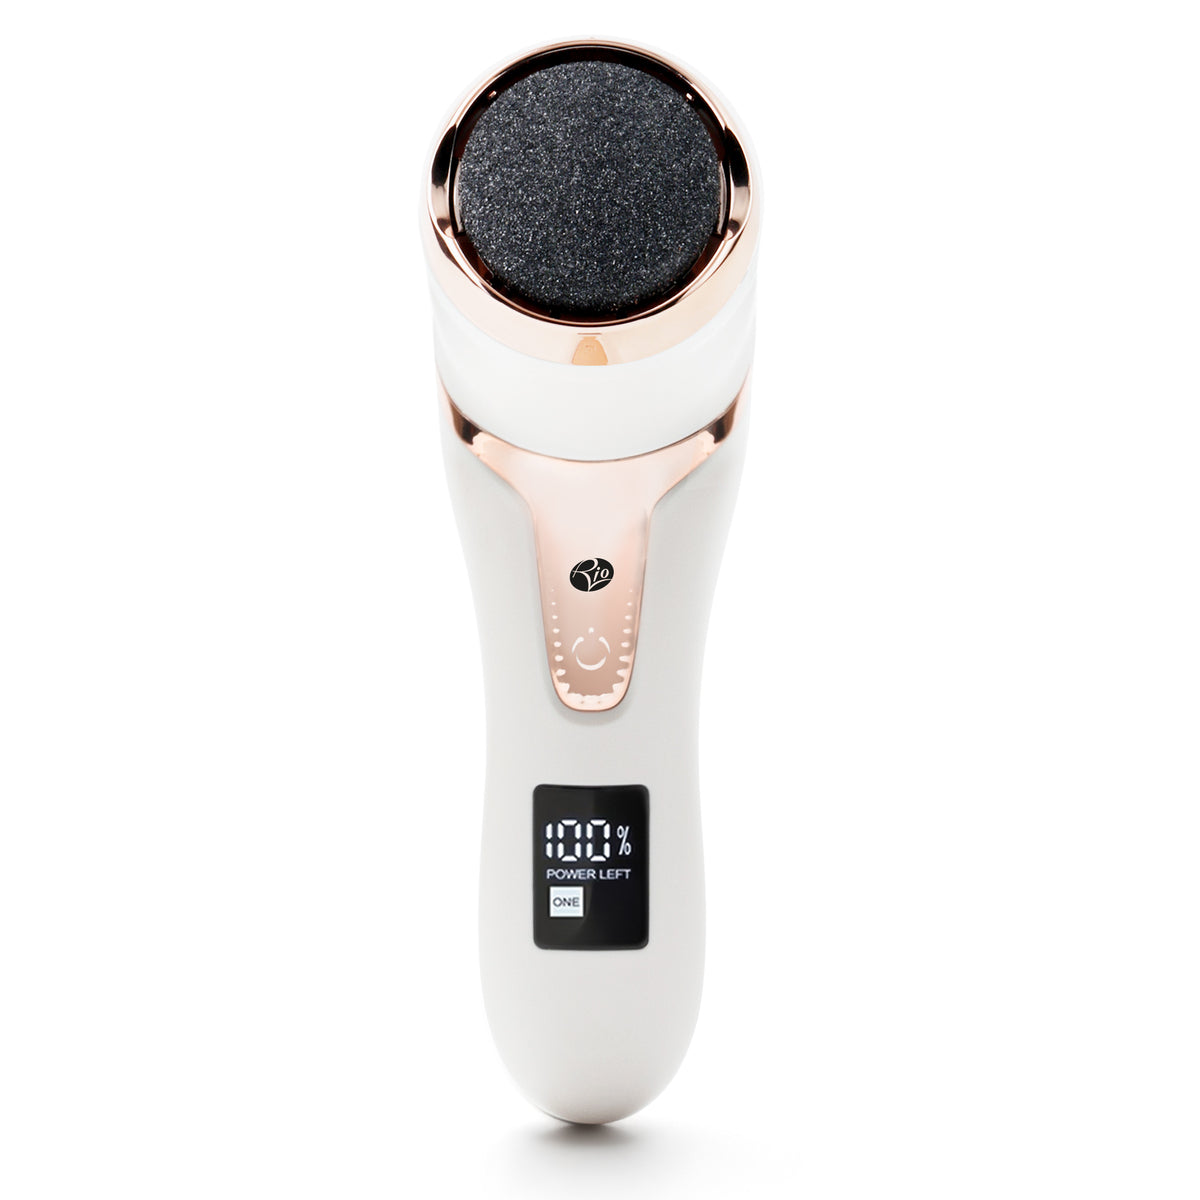 Go Smooth Electric Foot File with Vacuum Action